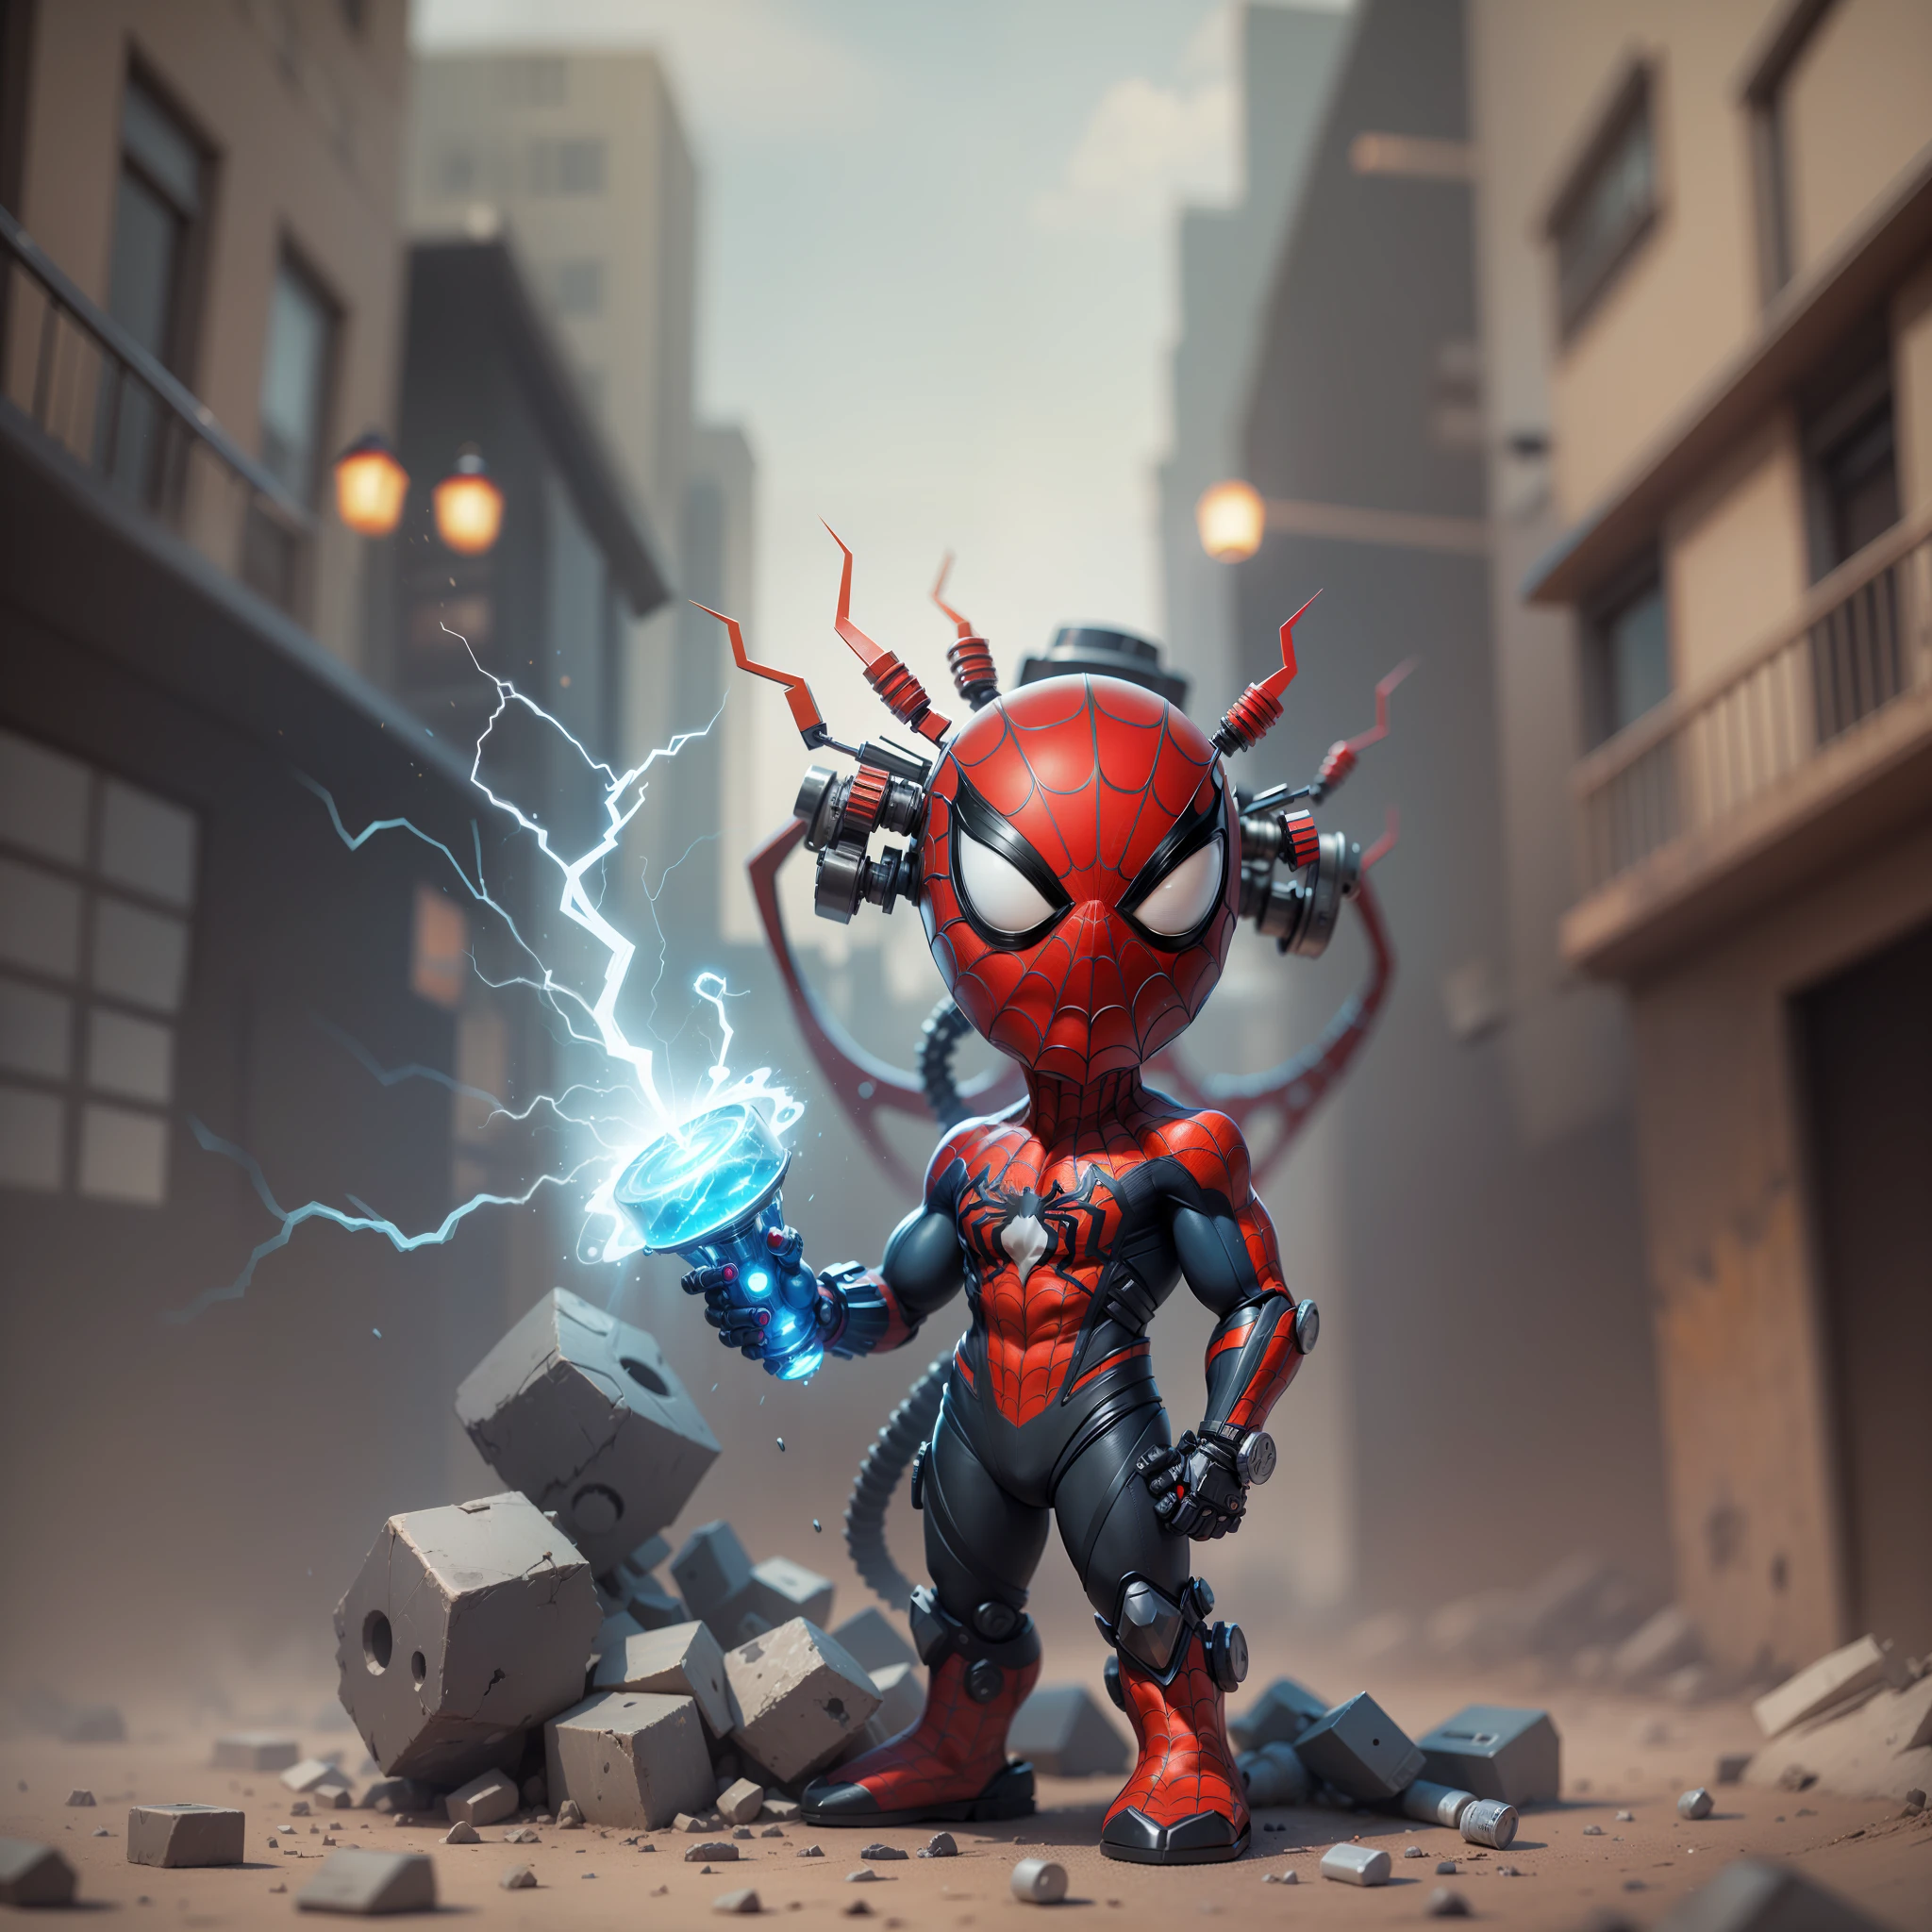 (Mechanical, Spider-Man: 1.331), (Mechanical) Cute Style, Small, Lava Jet, 3D Rendering, ((Q Version)), Machine Style, Movie Textures, Characters, Movie Lights, Heavy Robotic Arm, Background Around Lightning, Lightning, Cool, War Background, Ray Tracing, Full Body 3D Model, Action, Fashion Blind Box Toys. (Filler: 1.2) Chibi